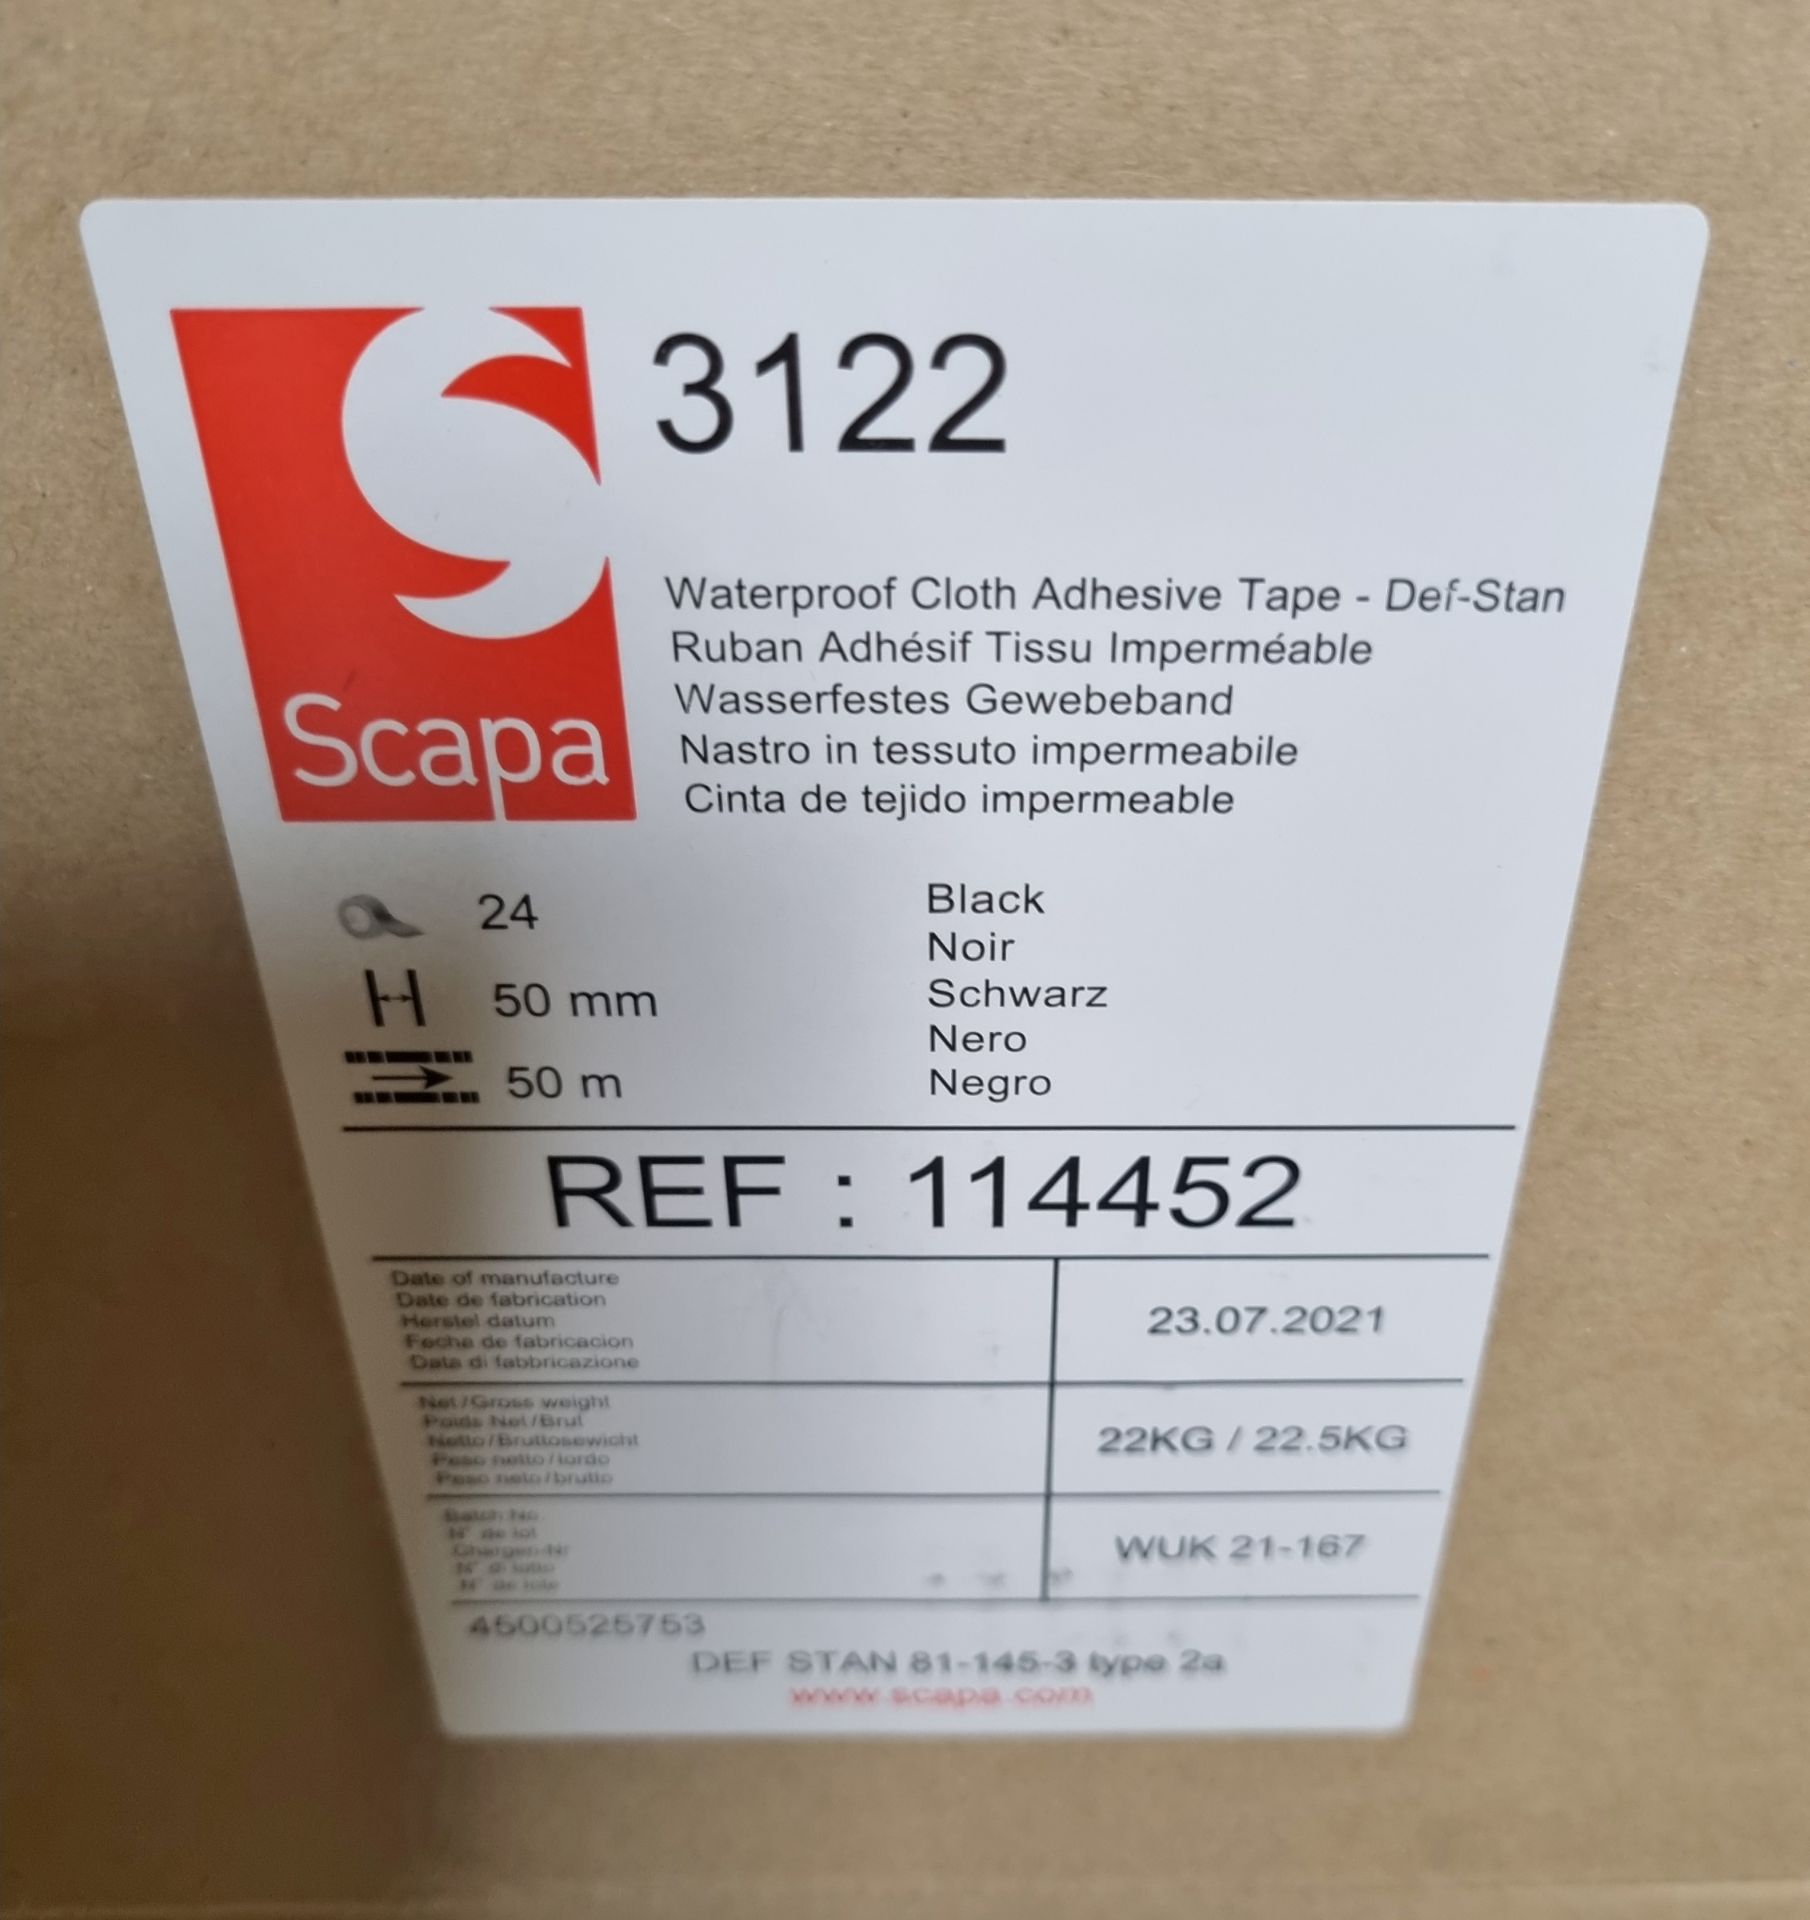 15x boxes of Scapa 3122 black, heavy duty waterproof adhesive cloth tape - 24 rolls in a box - Image 2 of 3